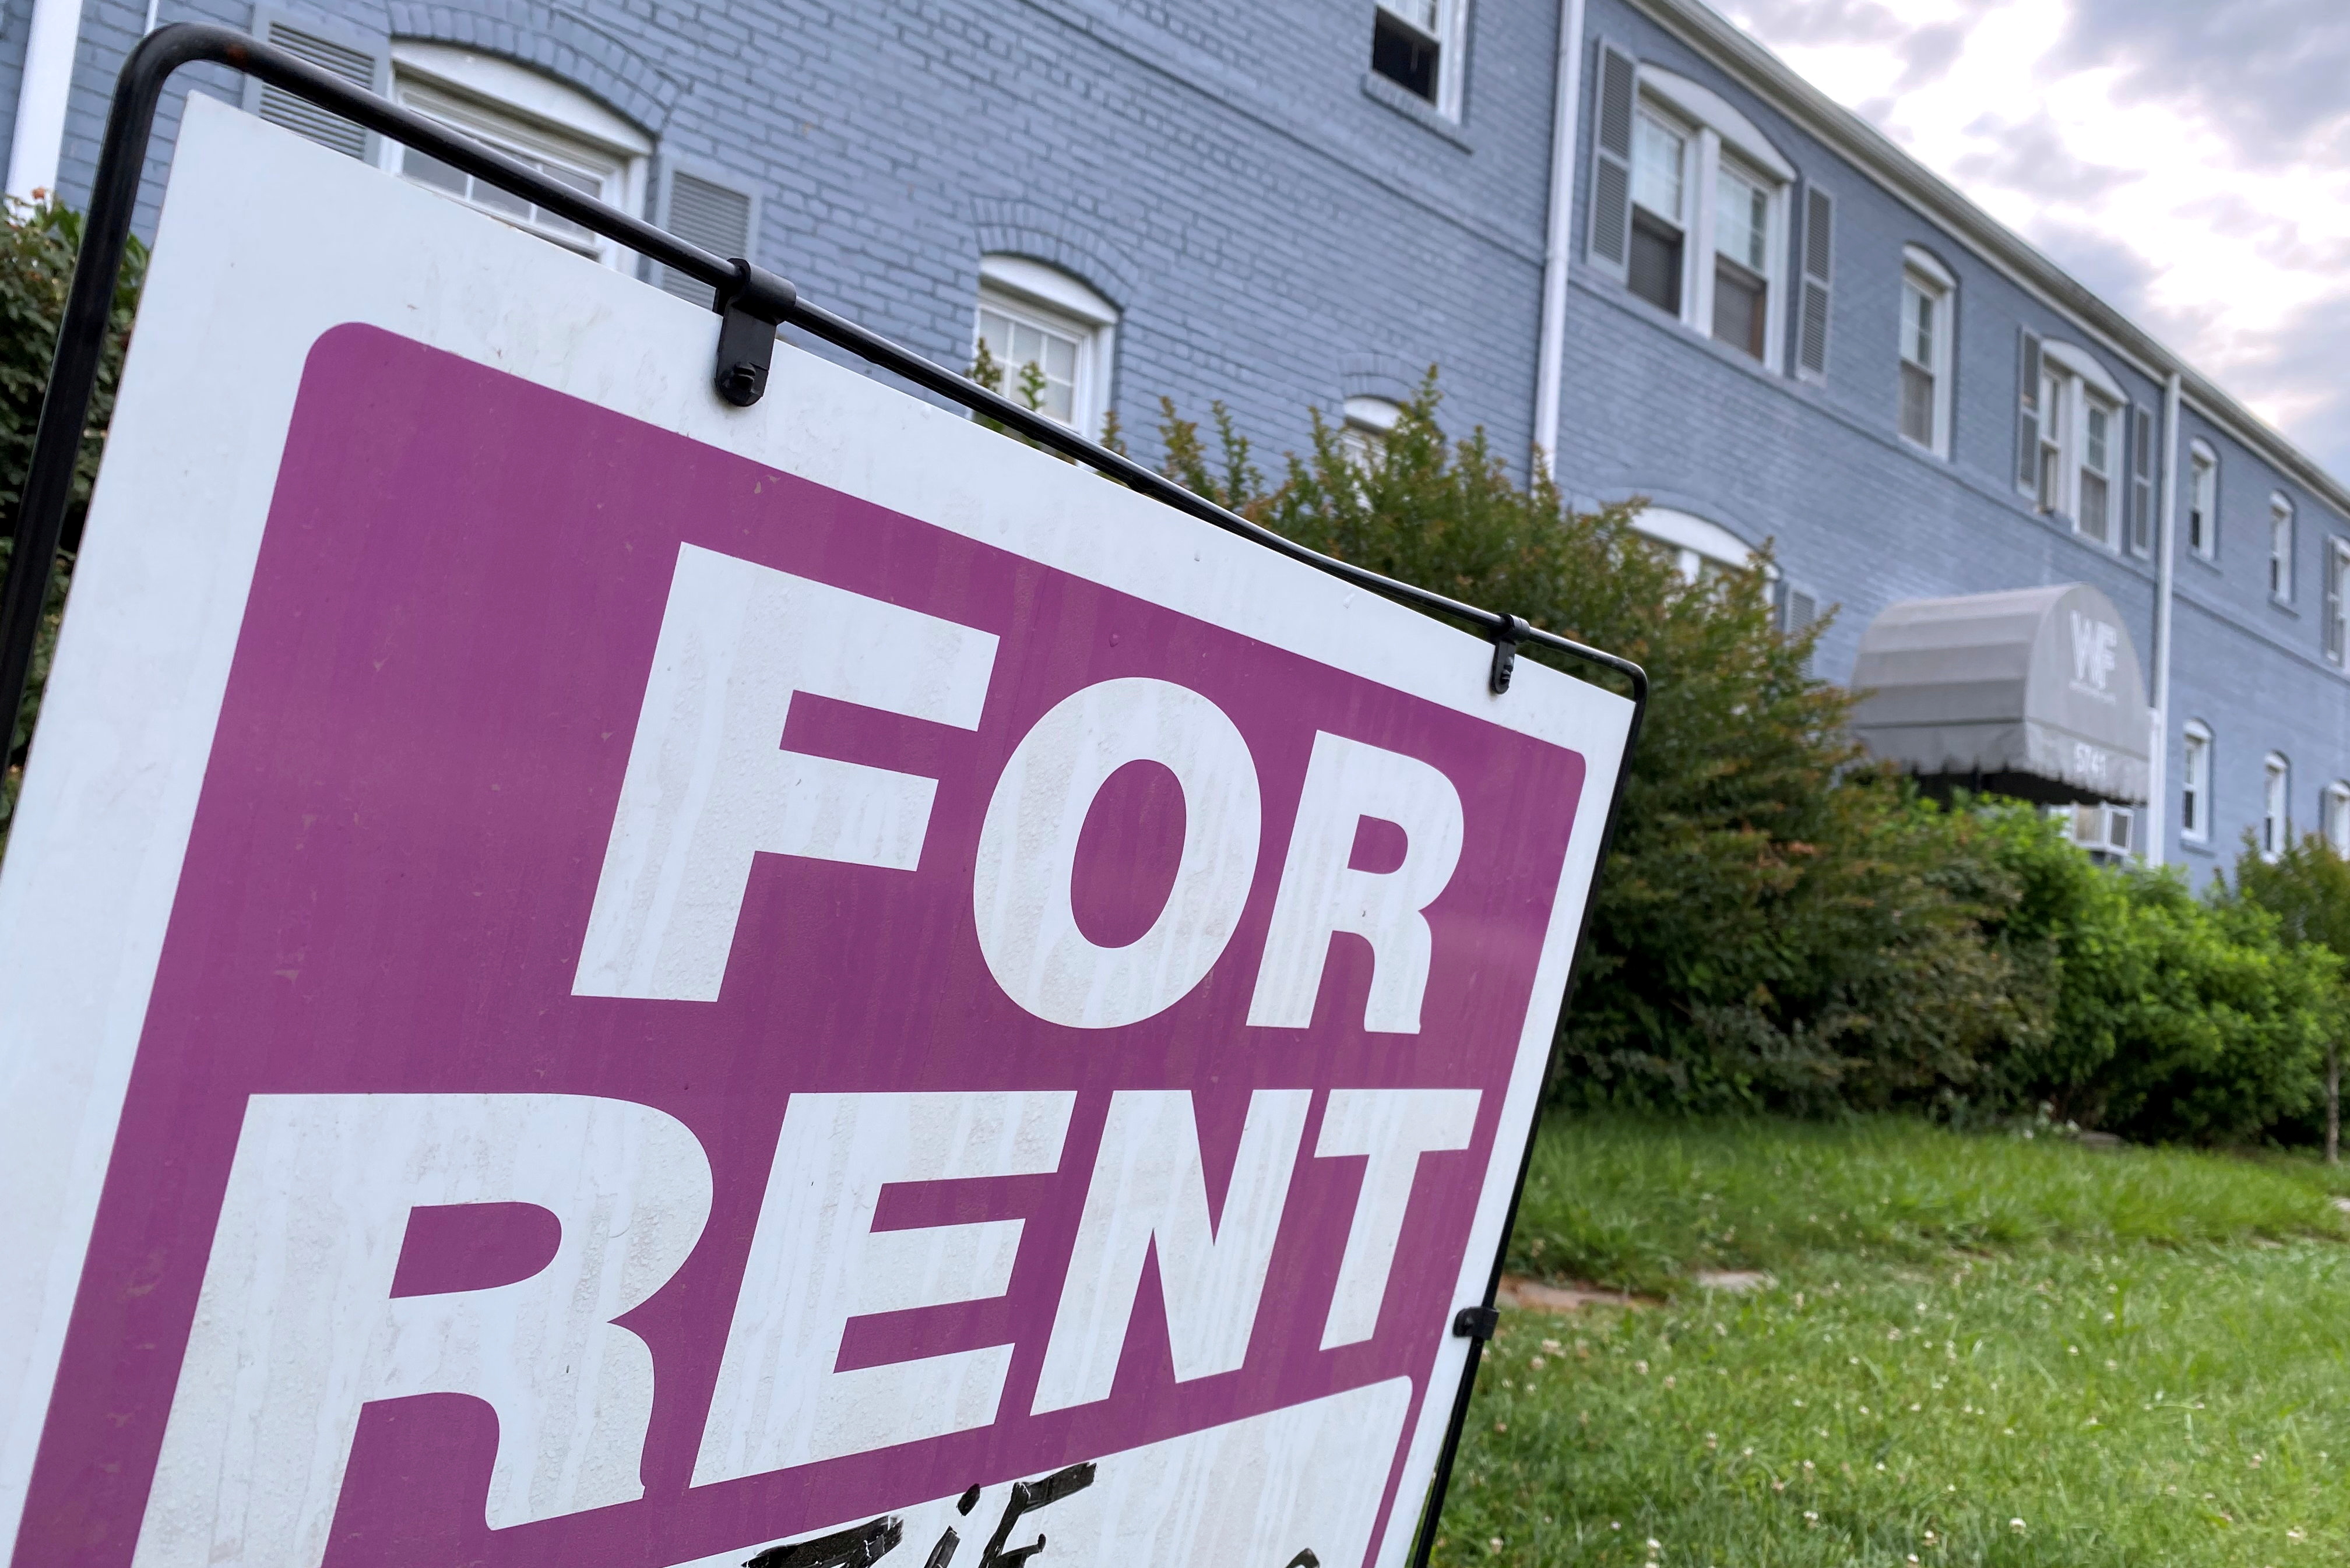 A "For Rent" sign is displayed in front of an apartment building in Arlington, Virginia, U.S.